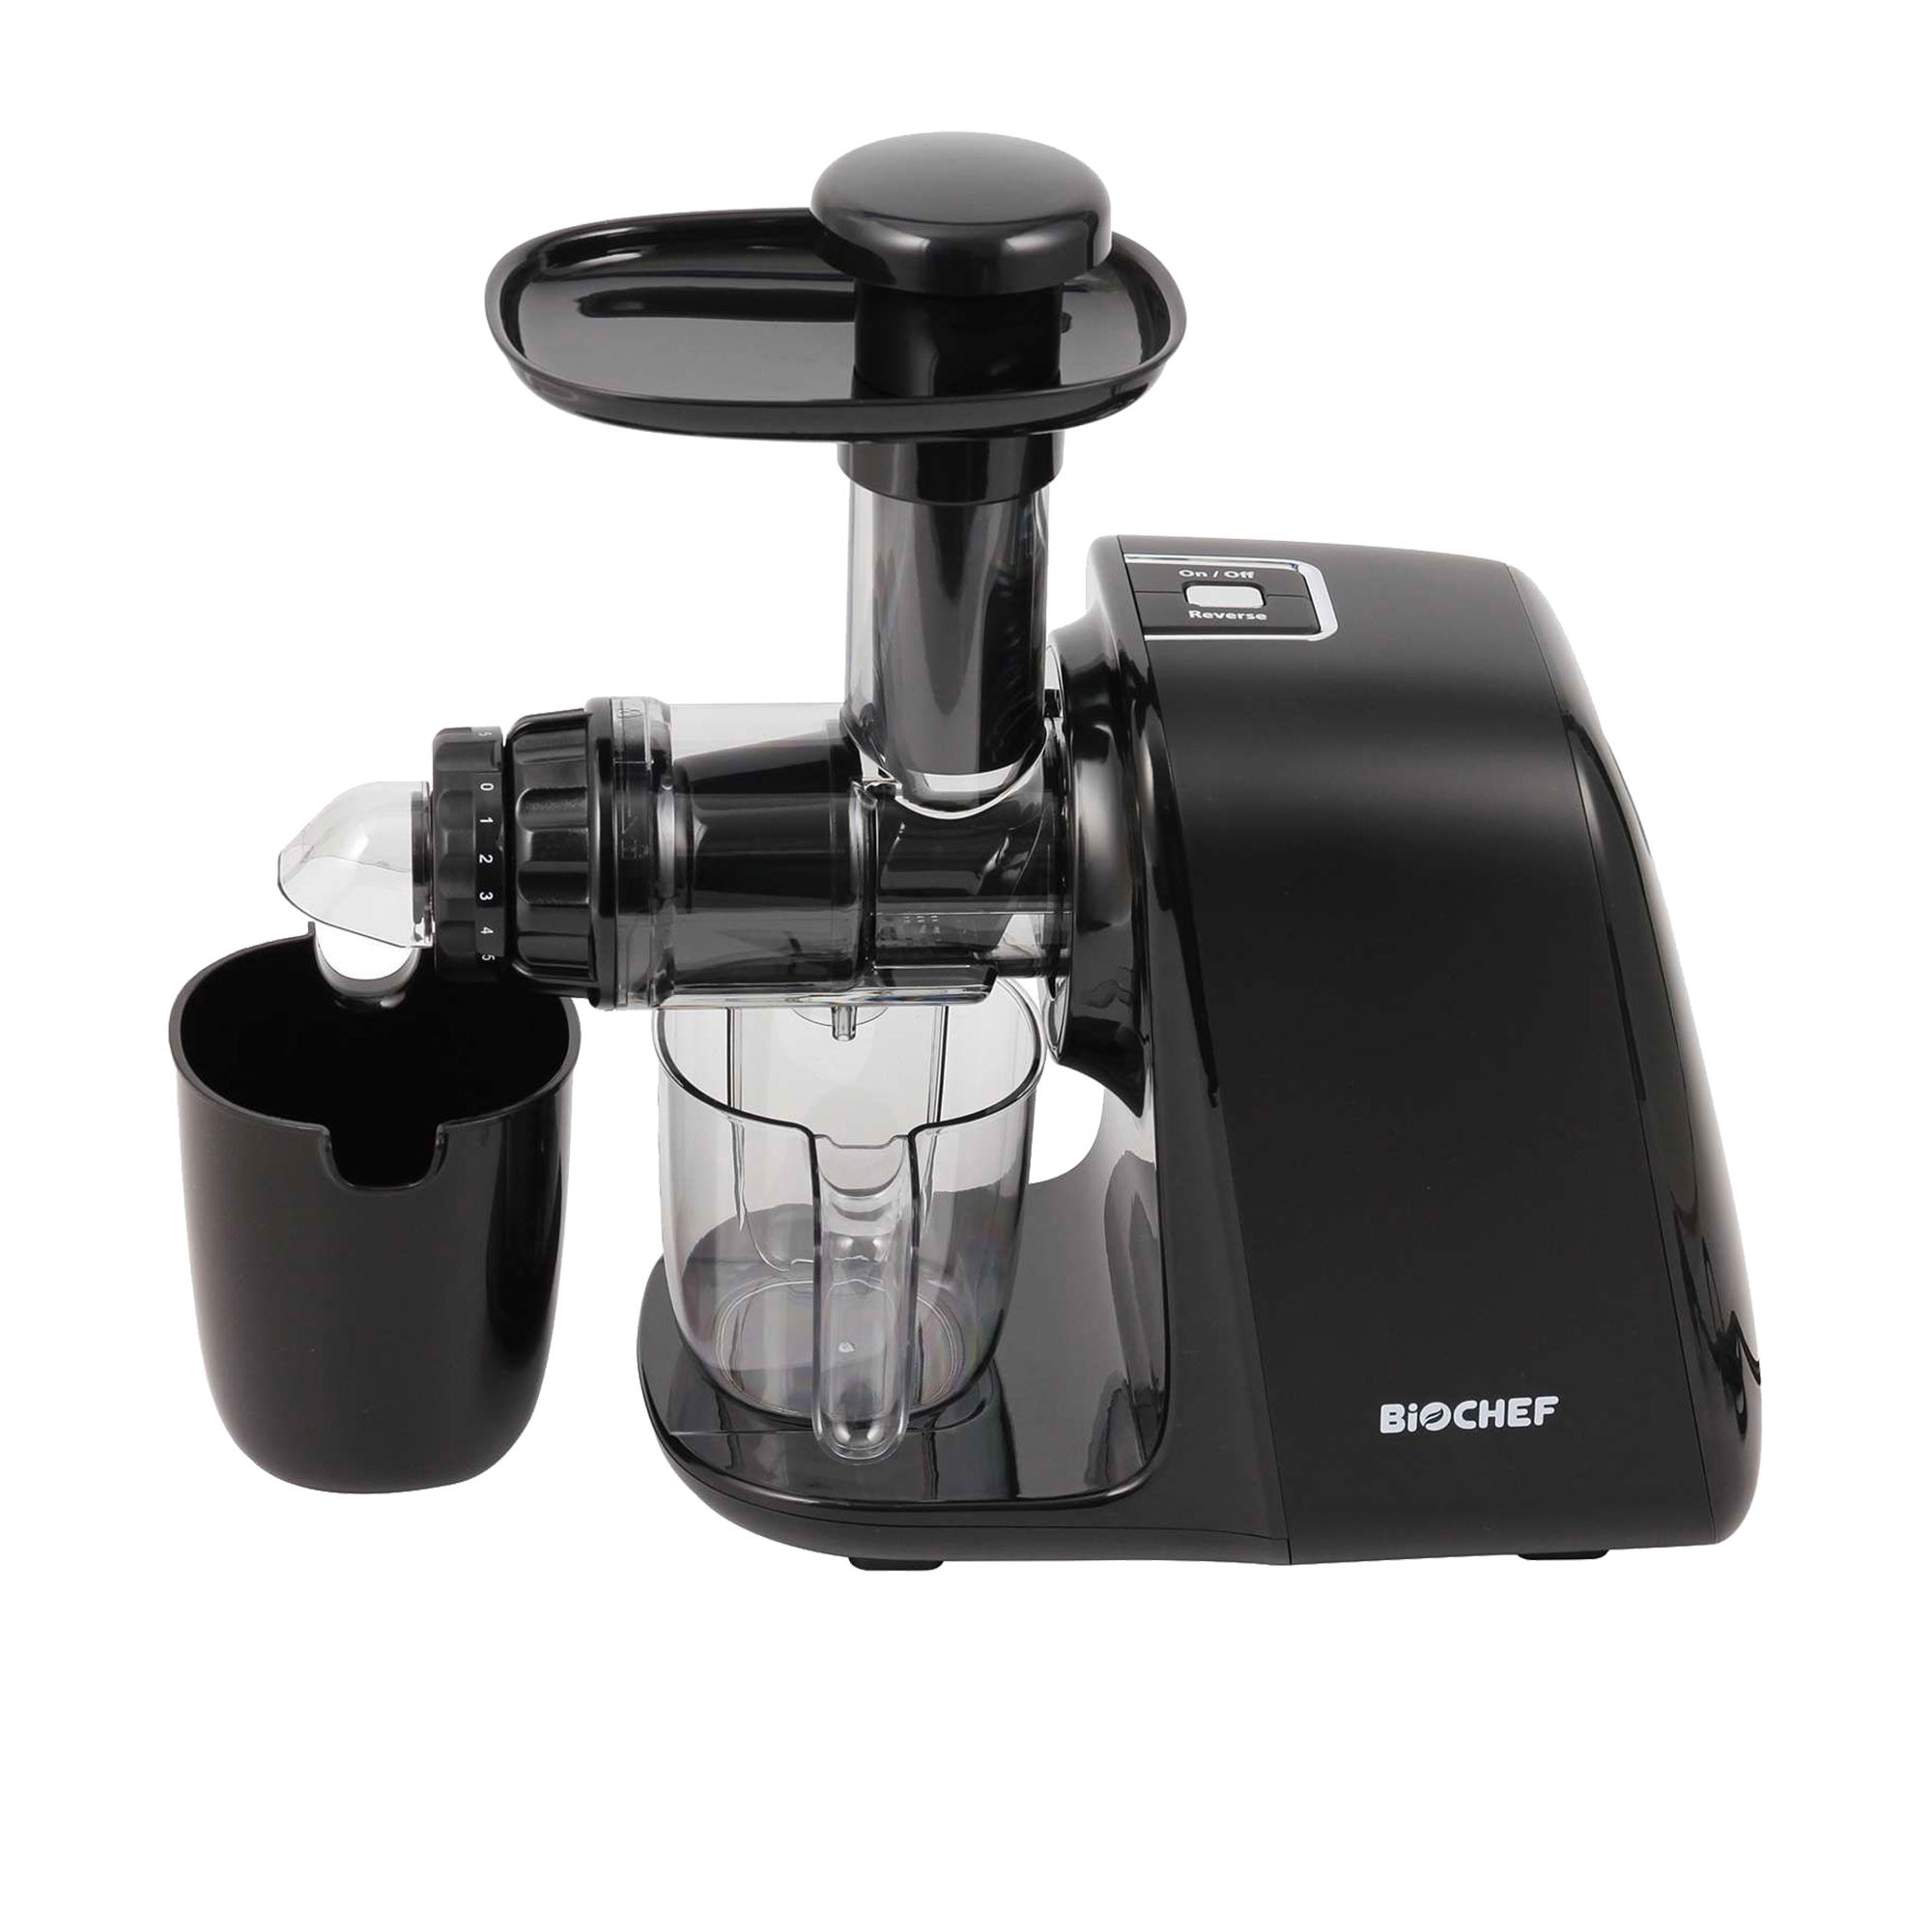 BioChef Axis Compact Cold Press Juicer Black Image 1